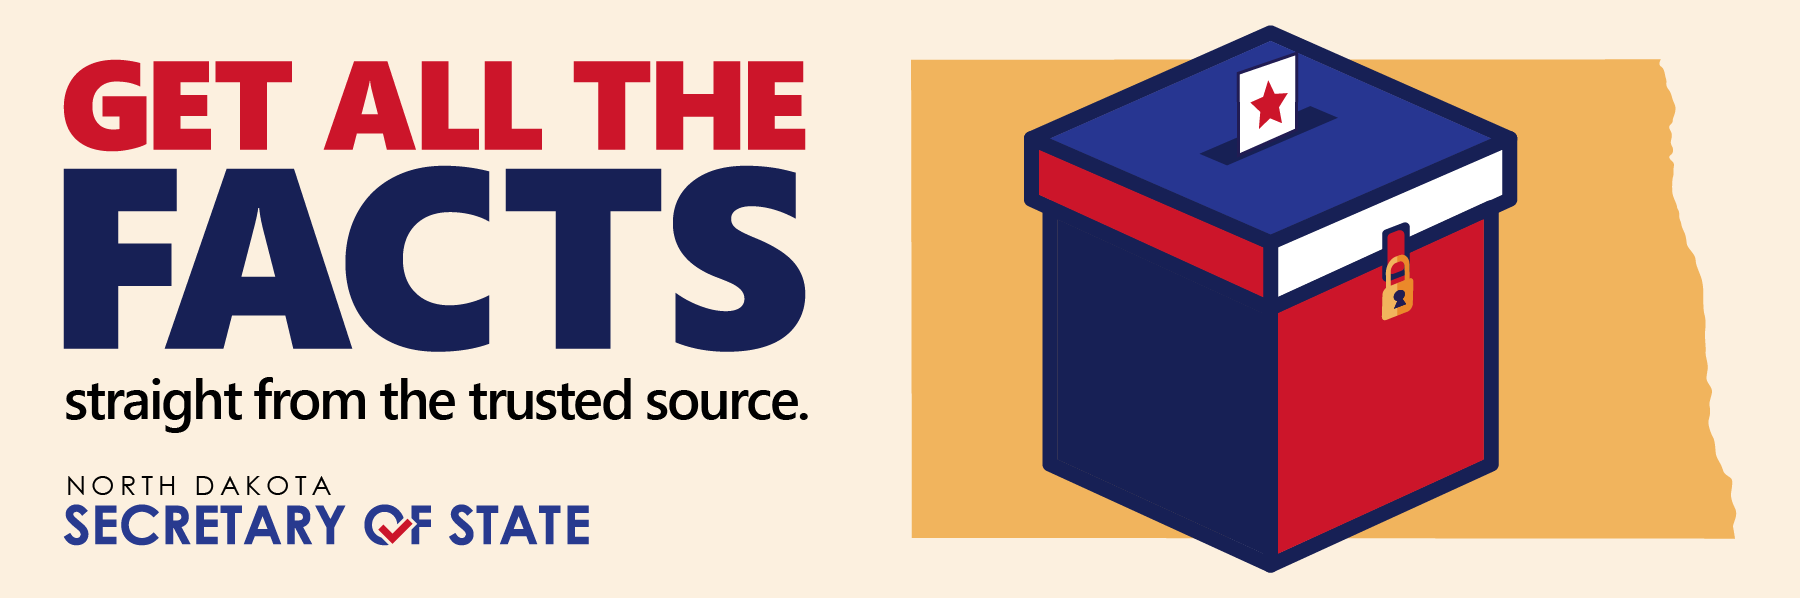 voting box with lock and get all the facts straight from the trusted source in text.